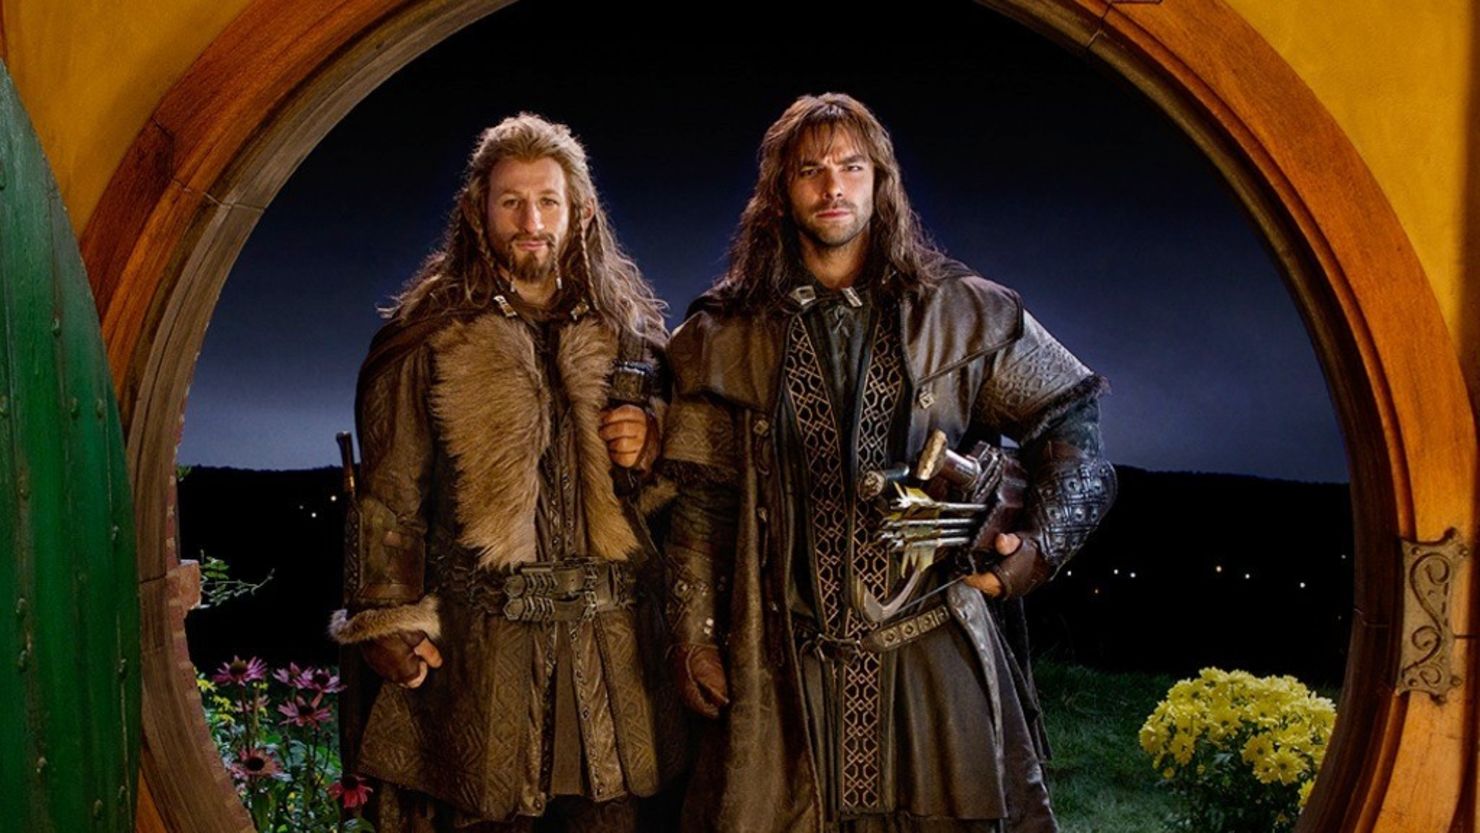 Dean O'Gorman, left, and Aidan Turner are among the dwarves in "The Hobbit: An Unexpected Journey."